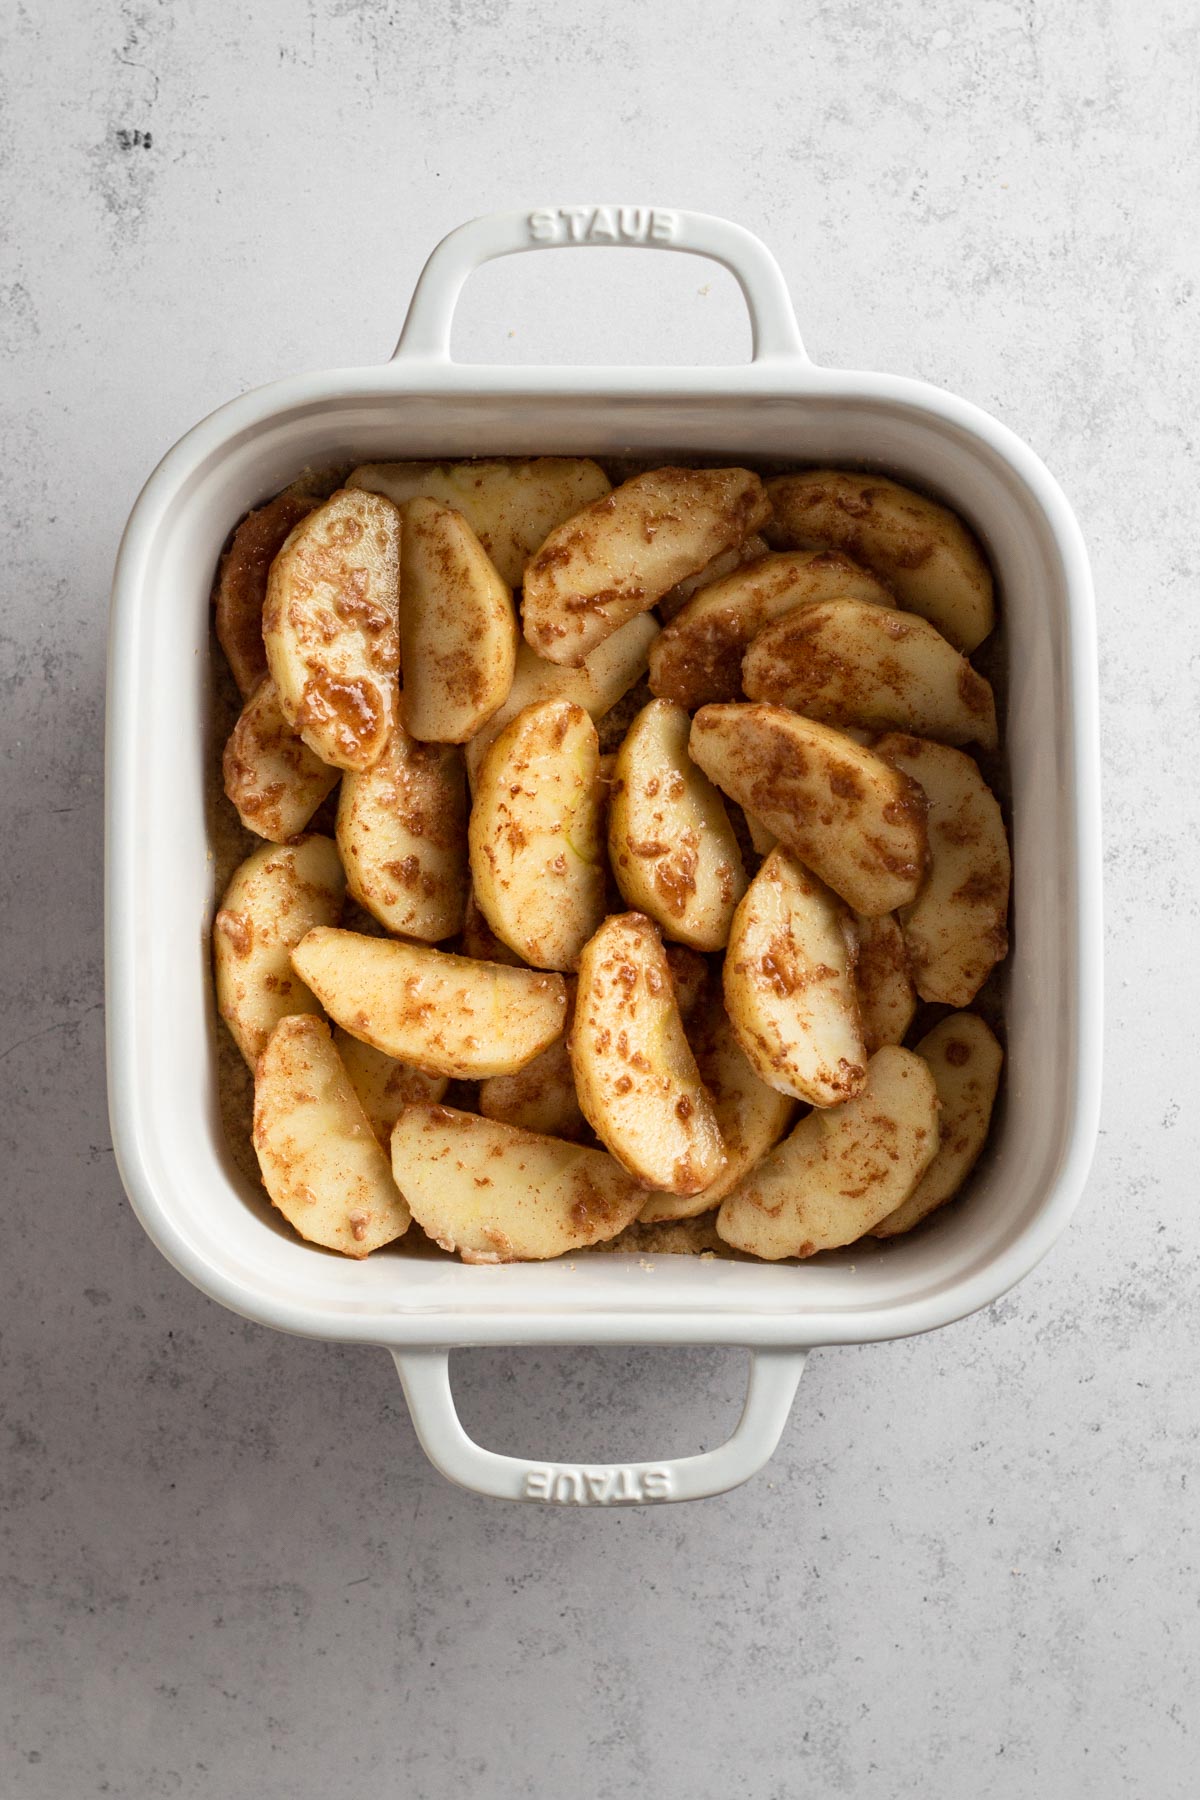 Seasoned apple slices atop shortbread crust in a white baking dish.